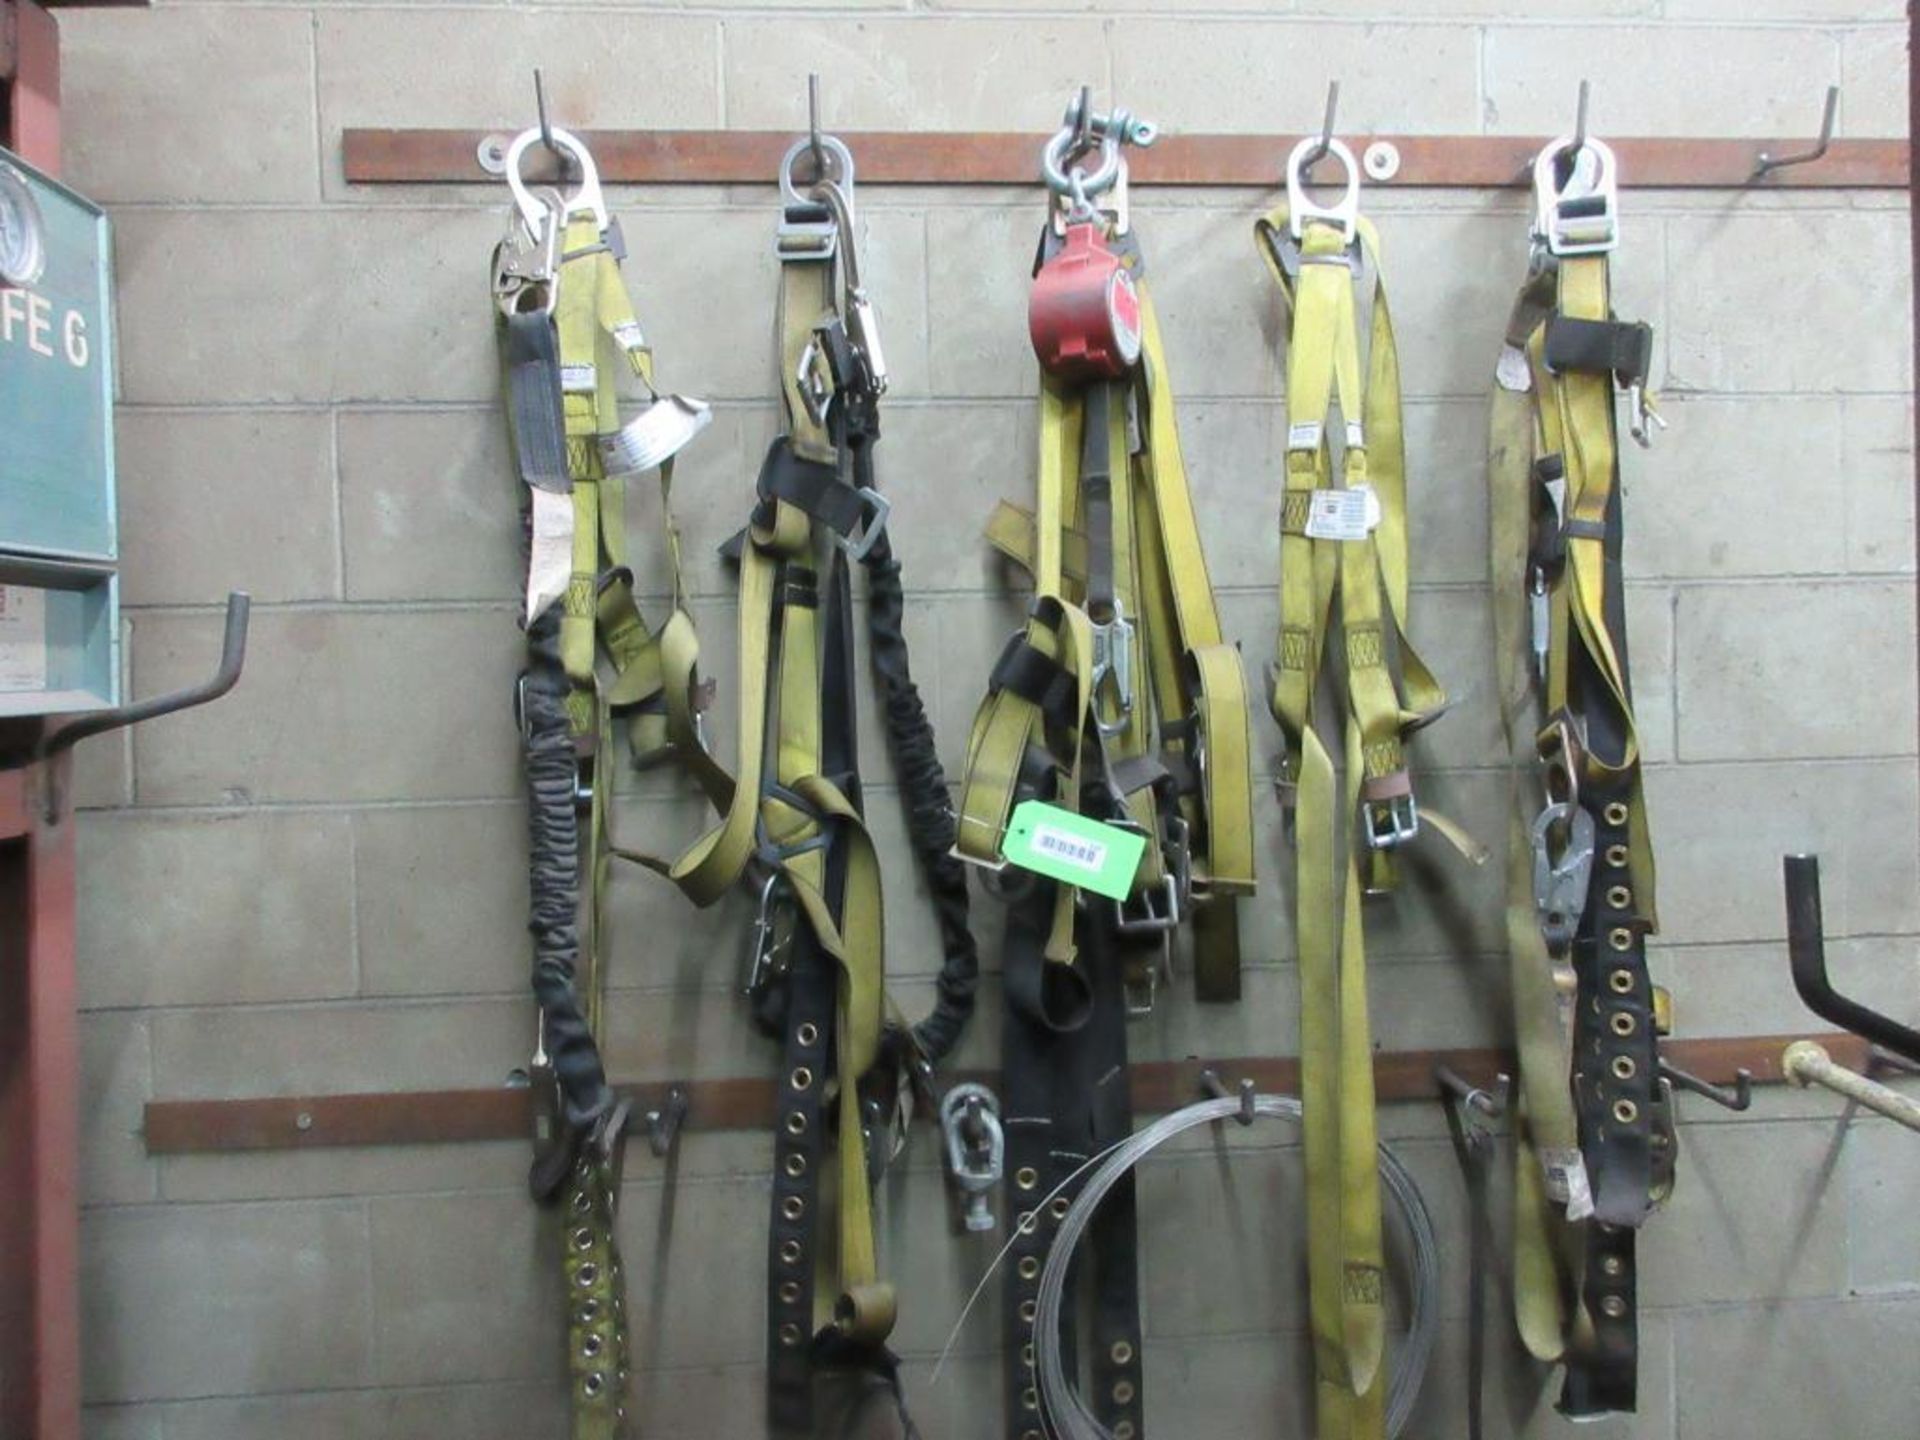 LOT OF HARNESSES WITH MILLER MINILITE FALL LIMITER (WEST TOOL ROOM)